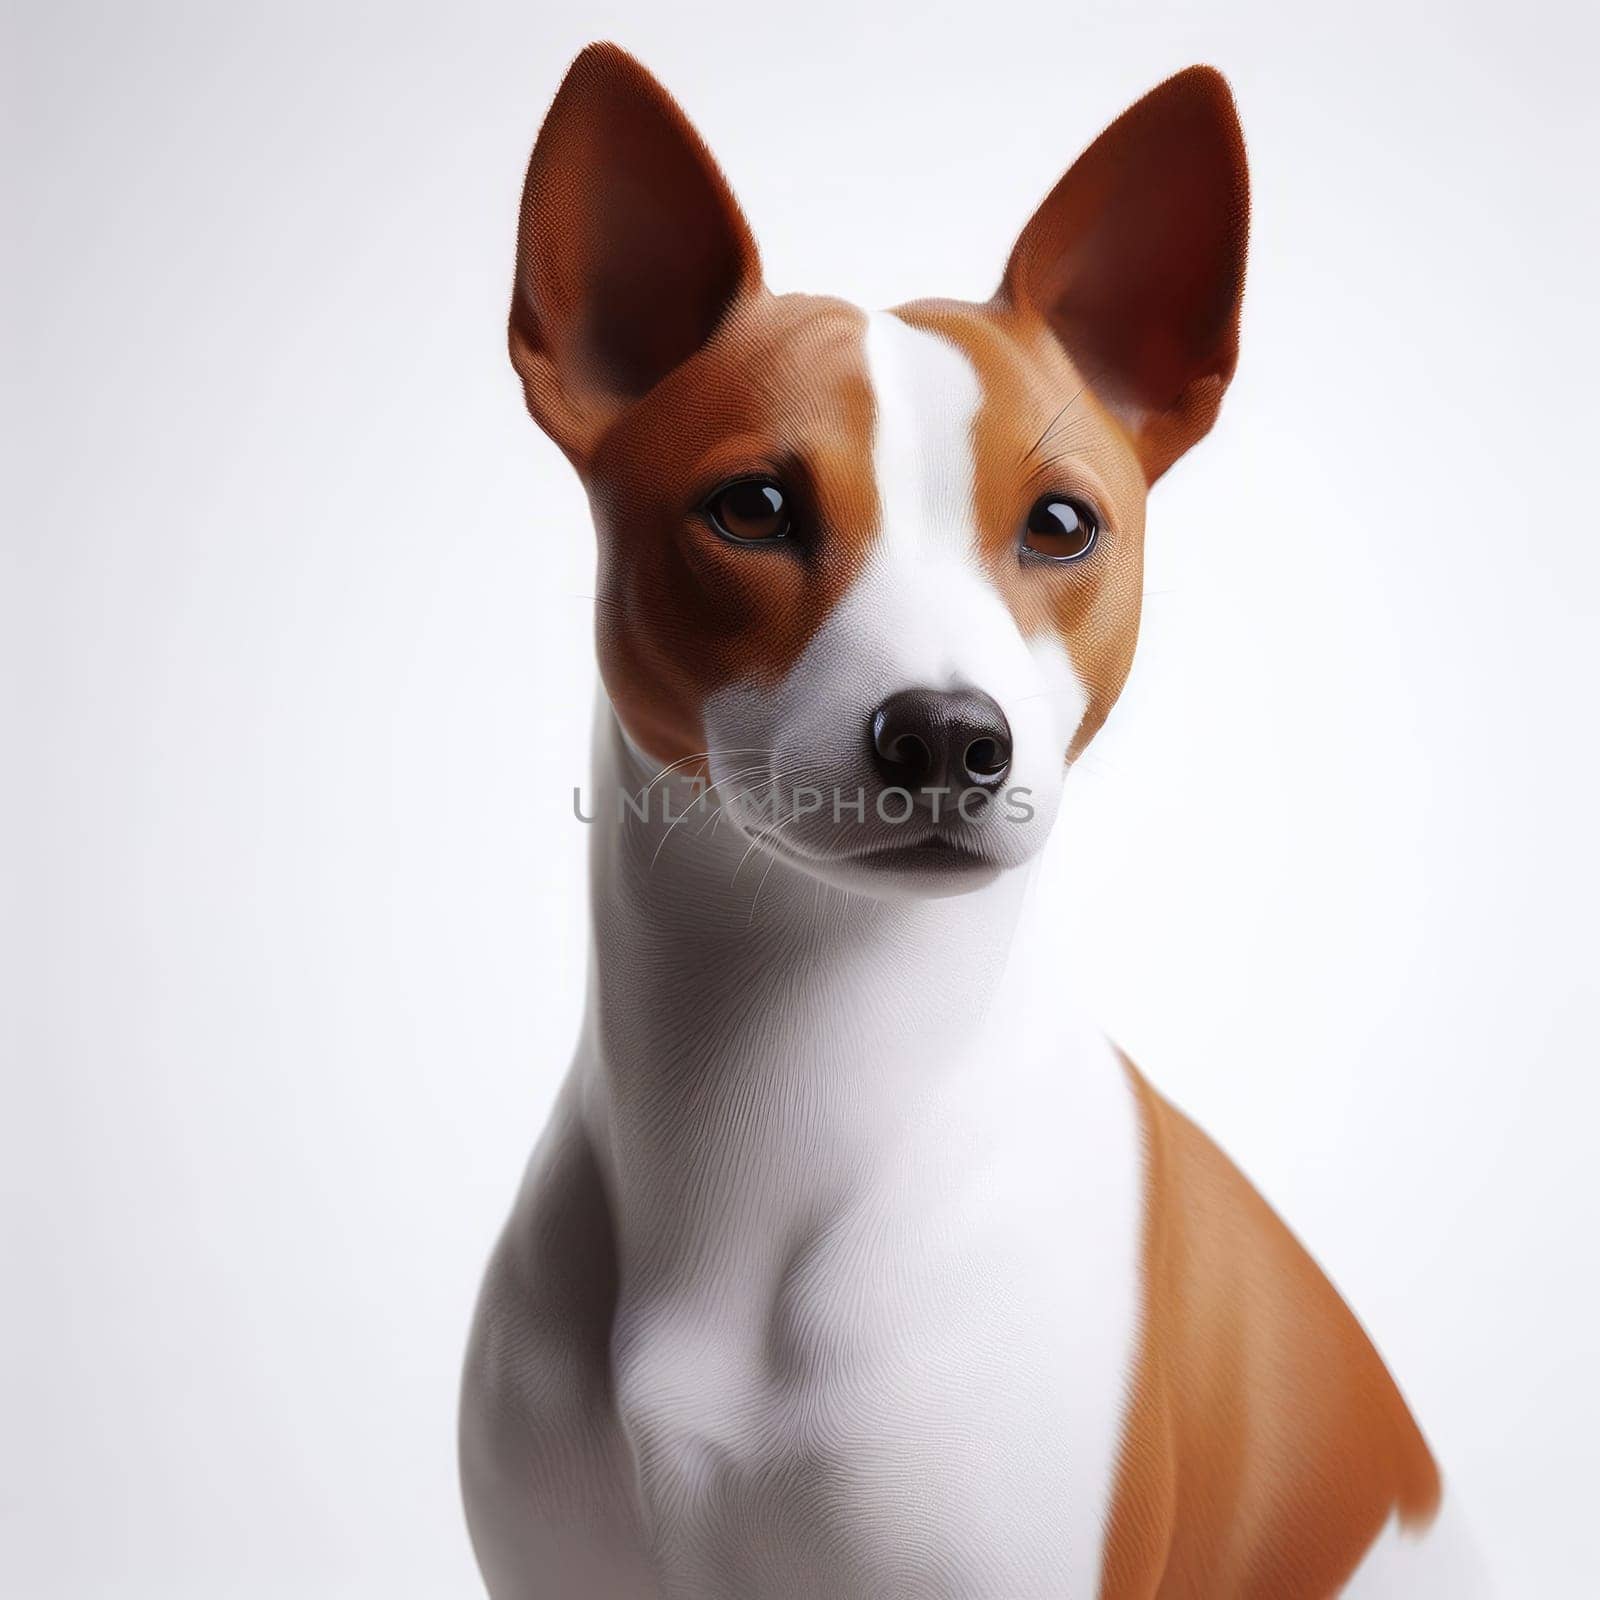 Portrait of a Basenji dog, an intelligent and energetic breed, posing against a white background